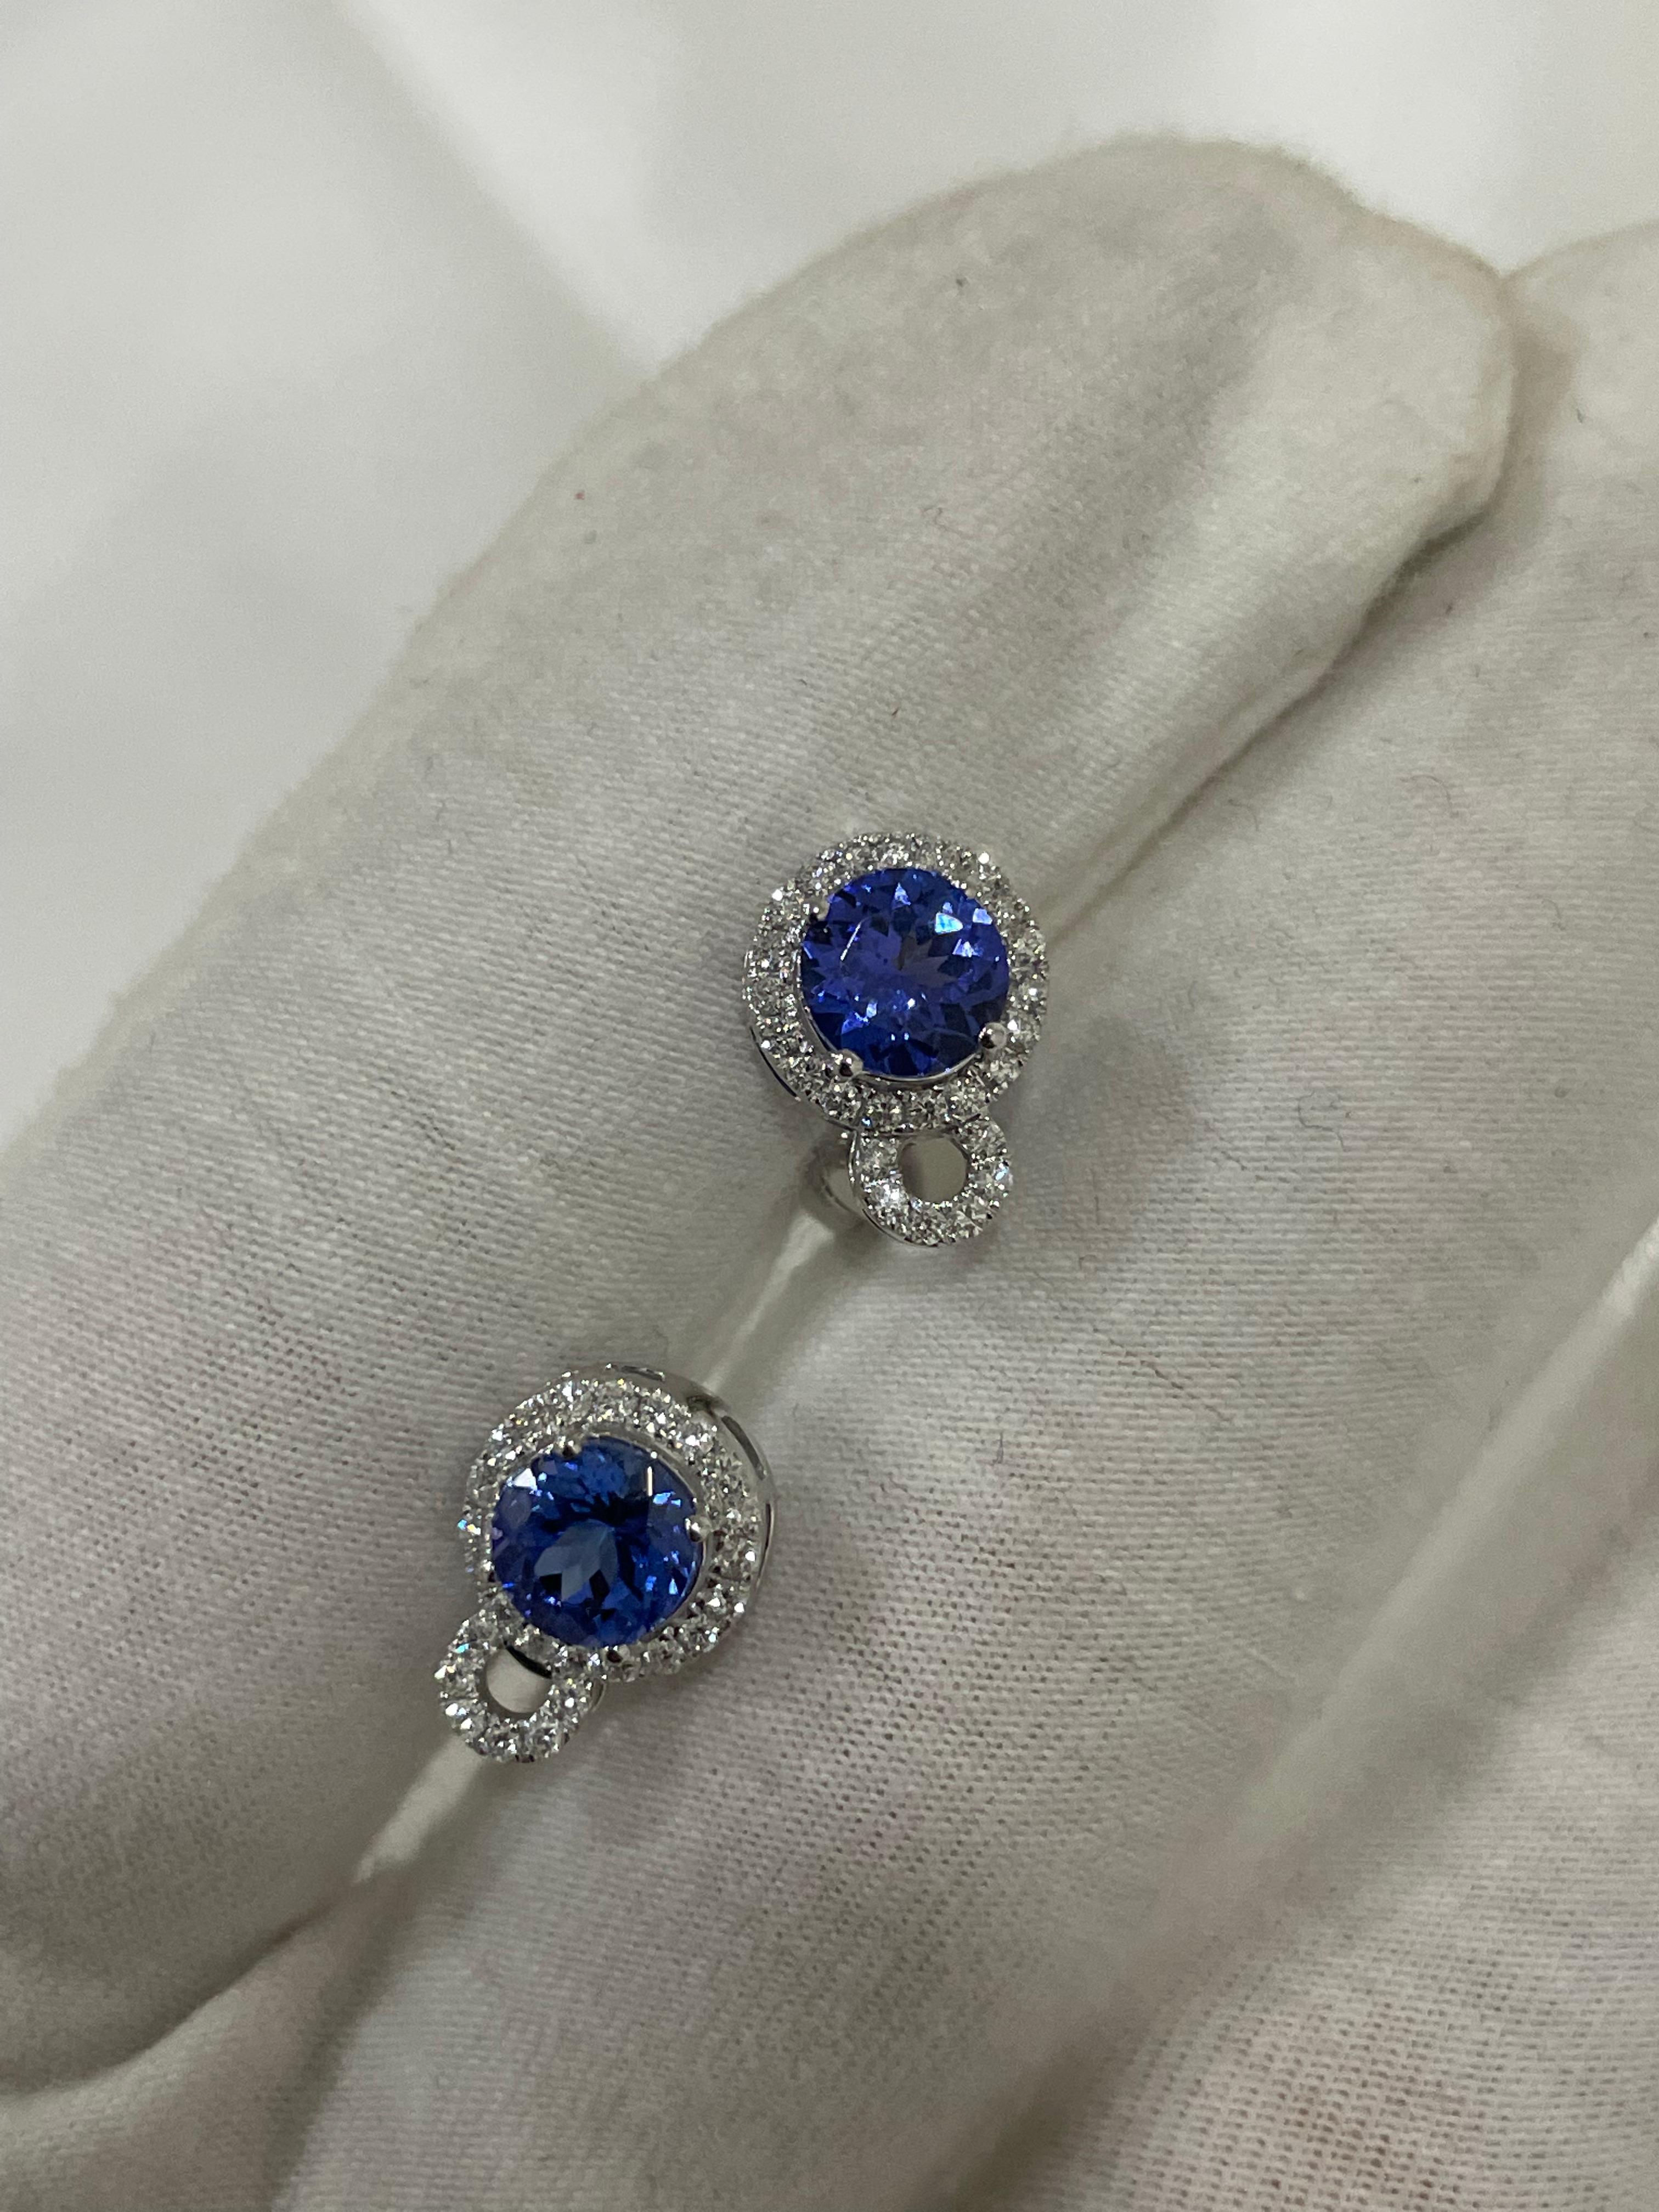 1.75 Carat Tanzanite Stud Earrings with Fine Diamonds in 18K White Gold In New Condition For Sale In Houston, TX